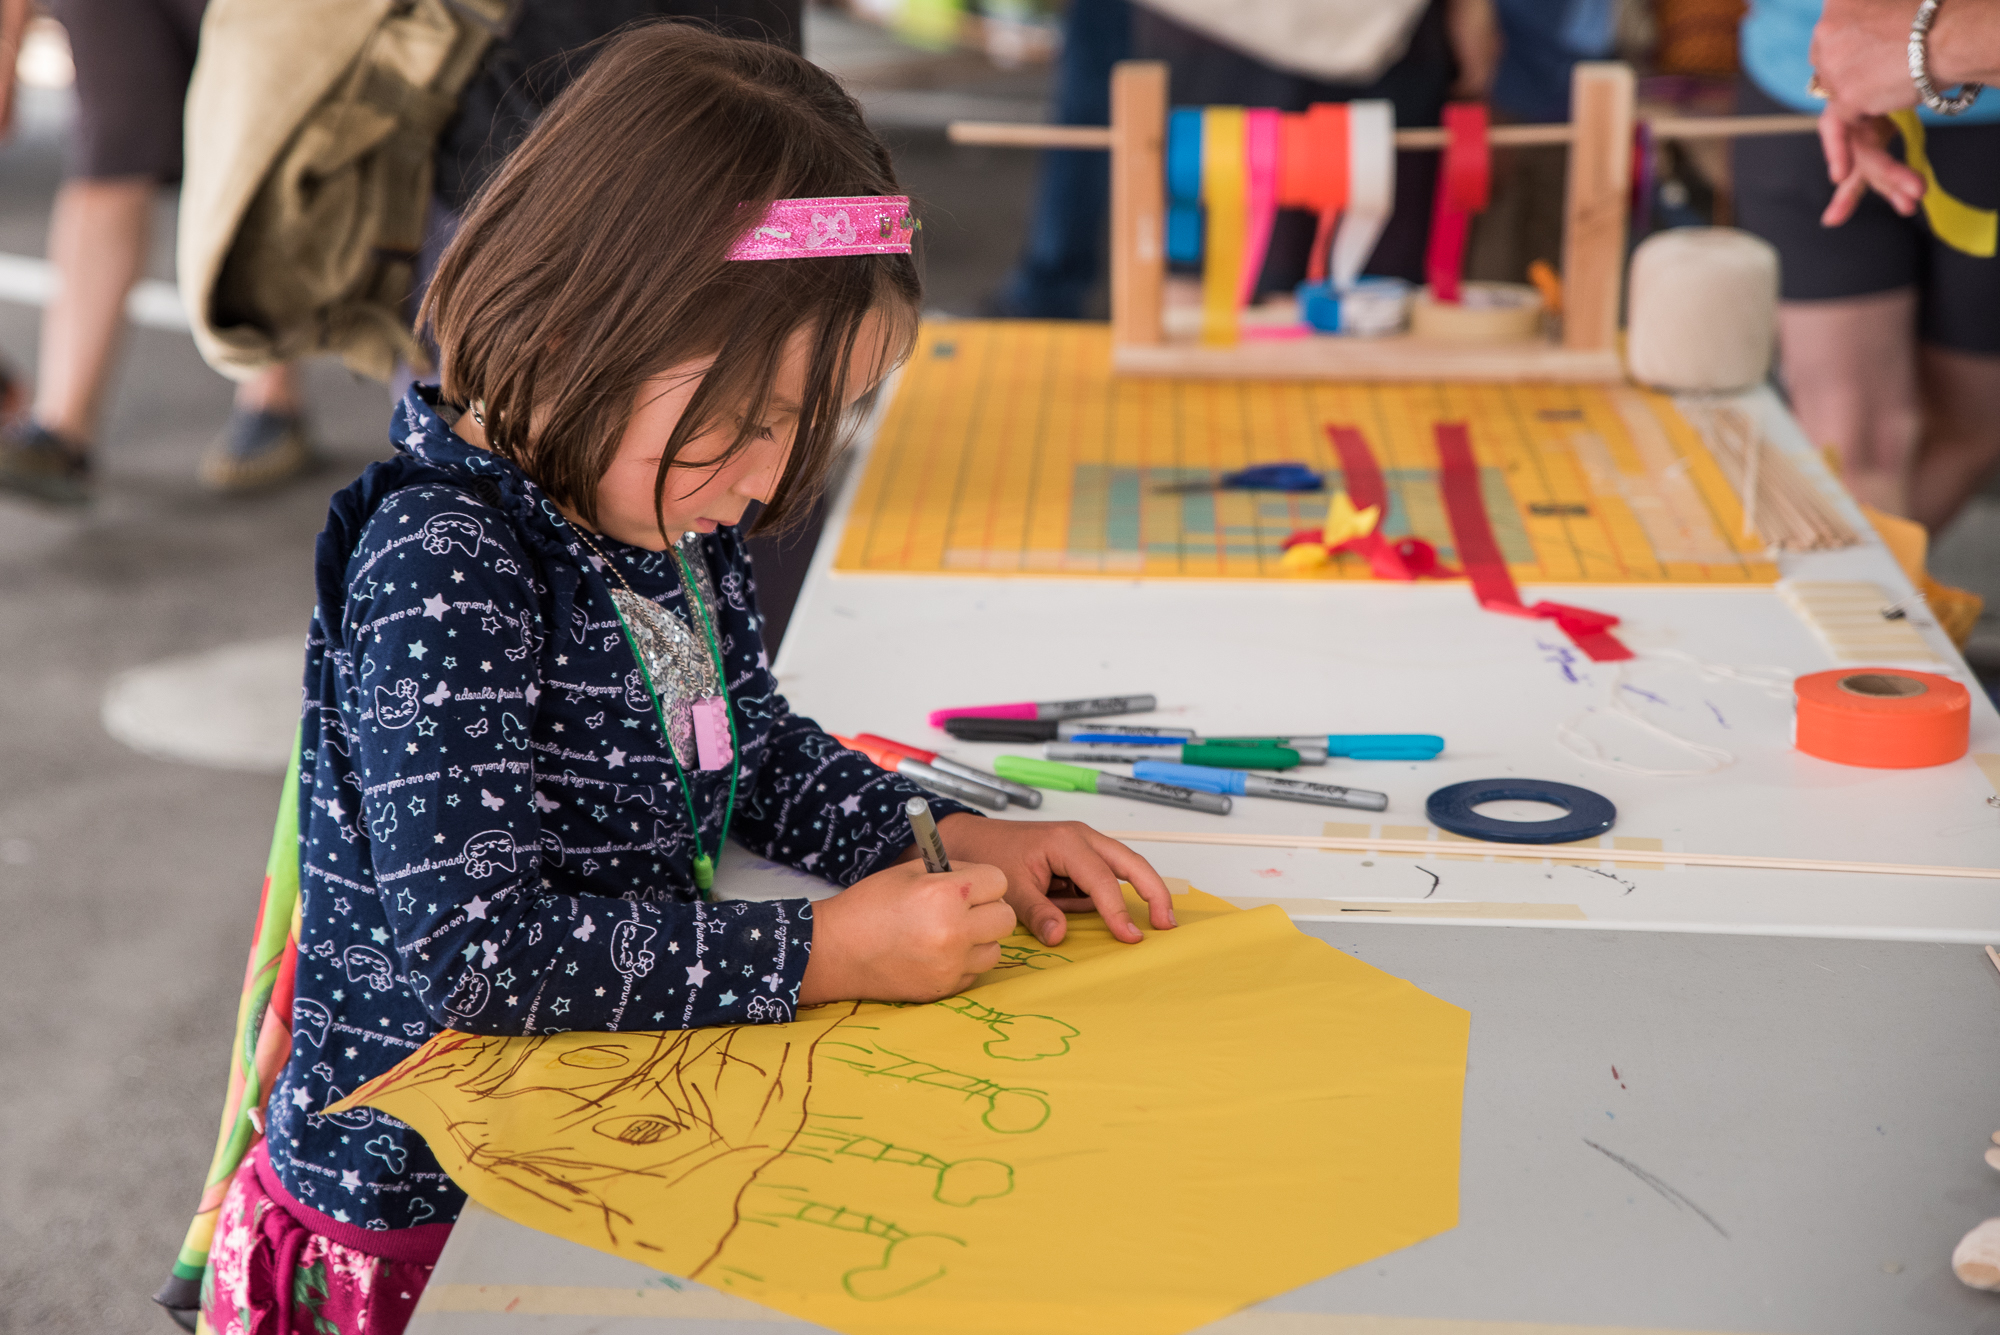 A young child creates art at MoPOP's Maker Faire